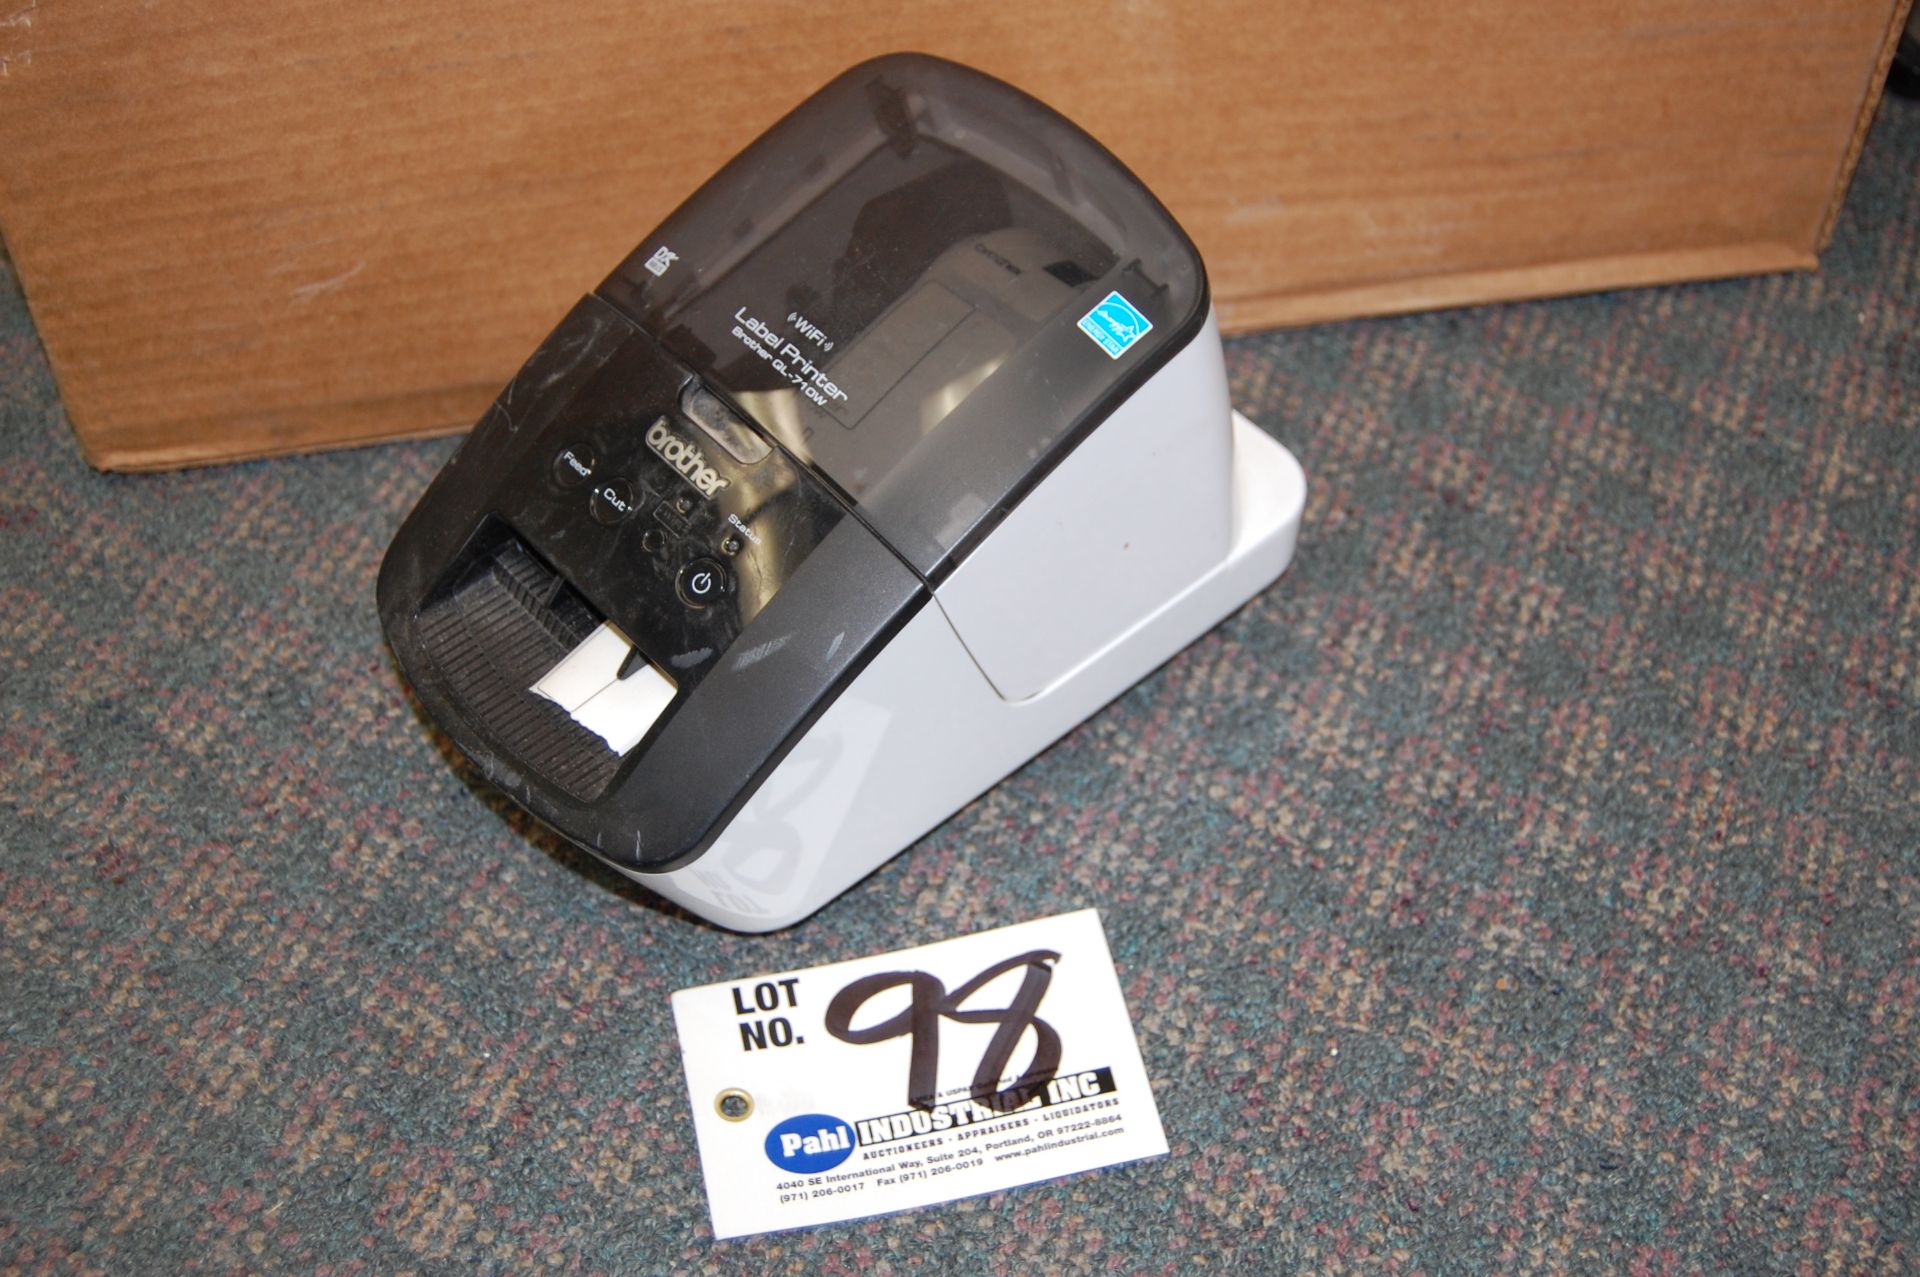 Brother QL-710W Thermal Label Printer Wi-Fi capable